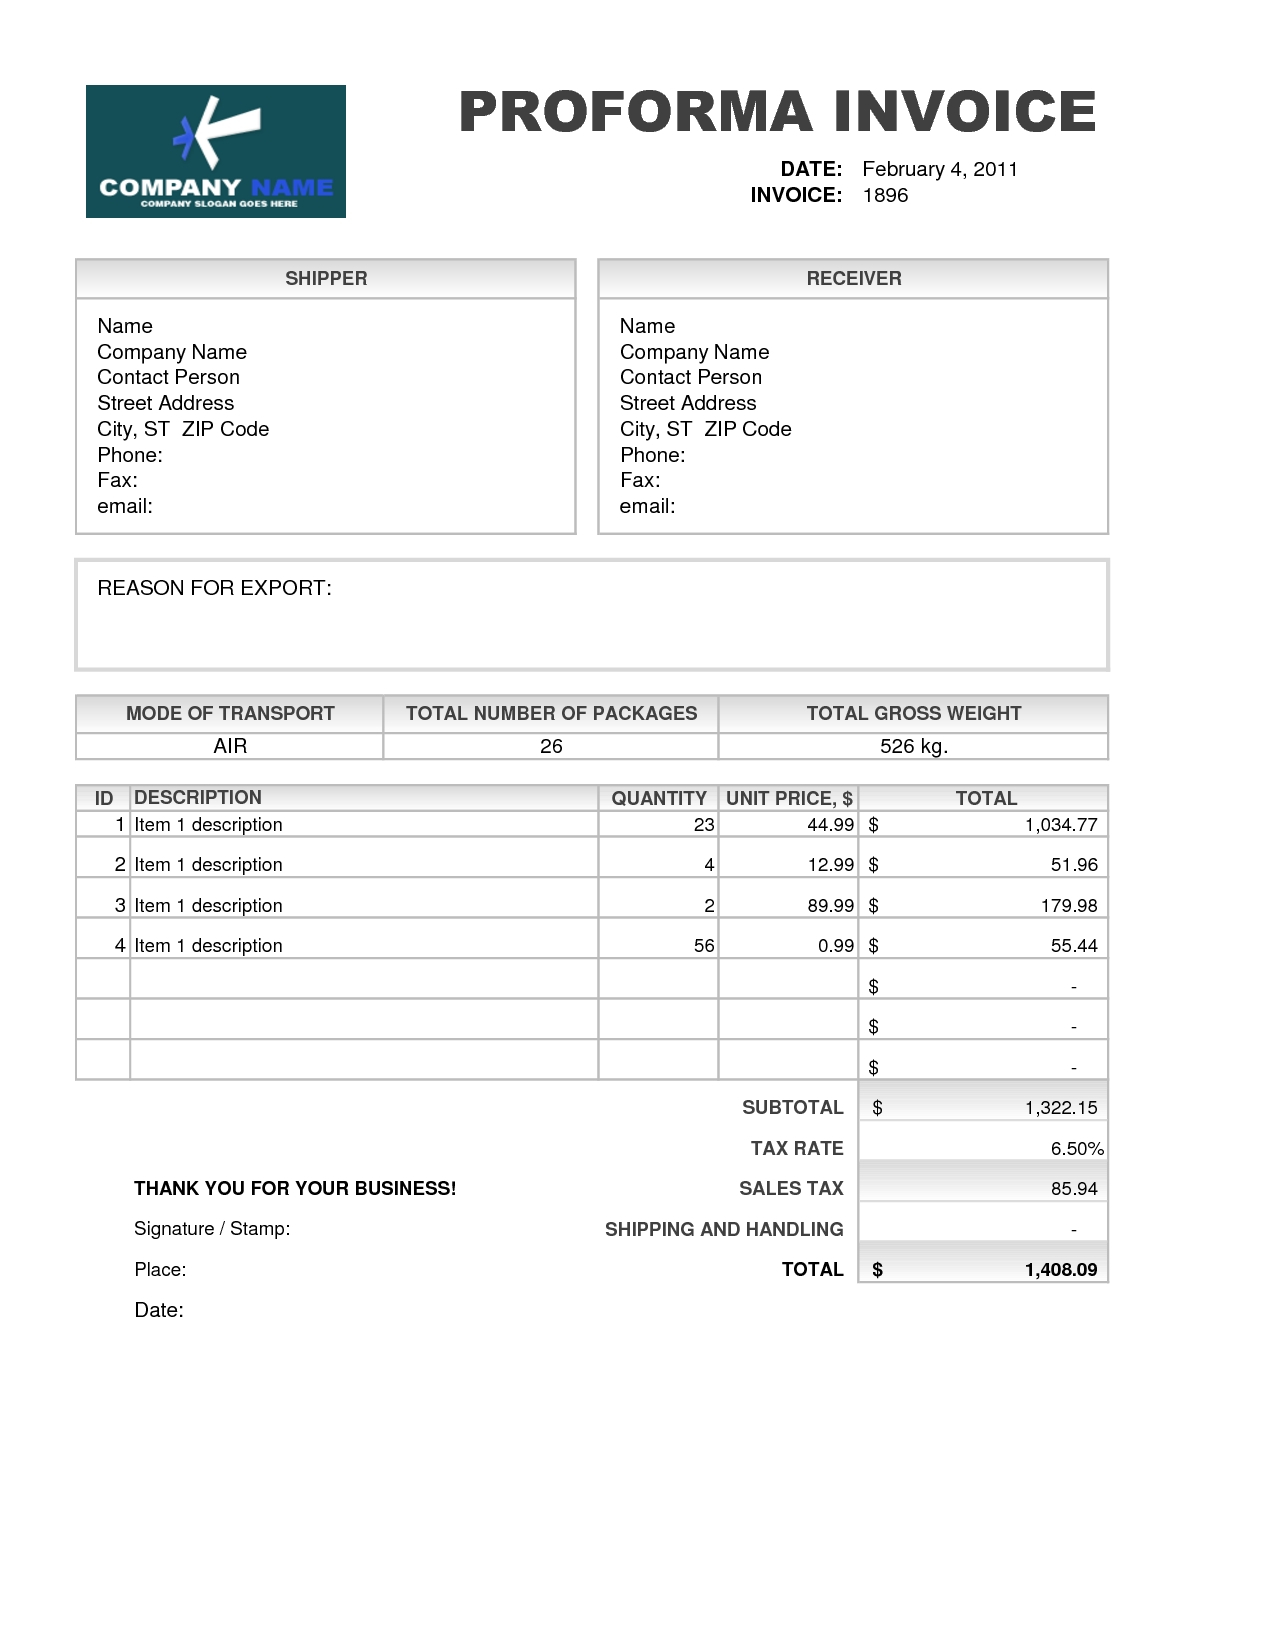 Proforma Invoice Download Free | Resume Format For Freshers Inside Free Proforma Invoice Template Word